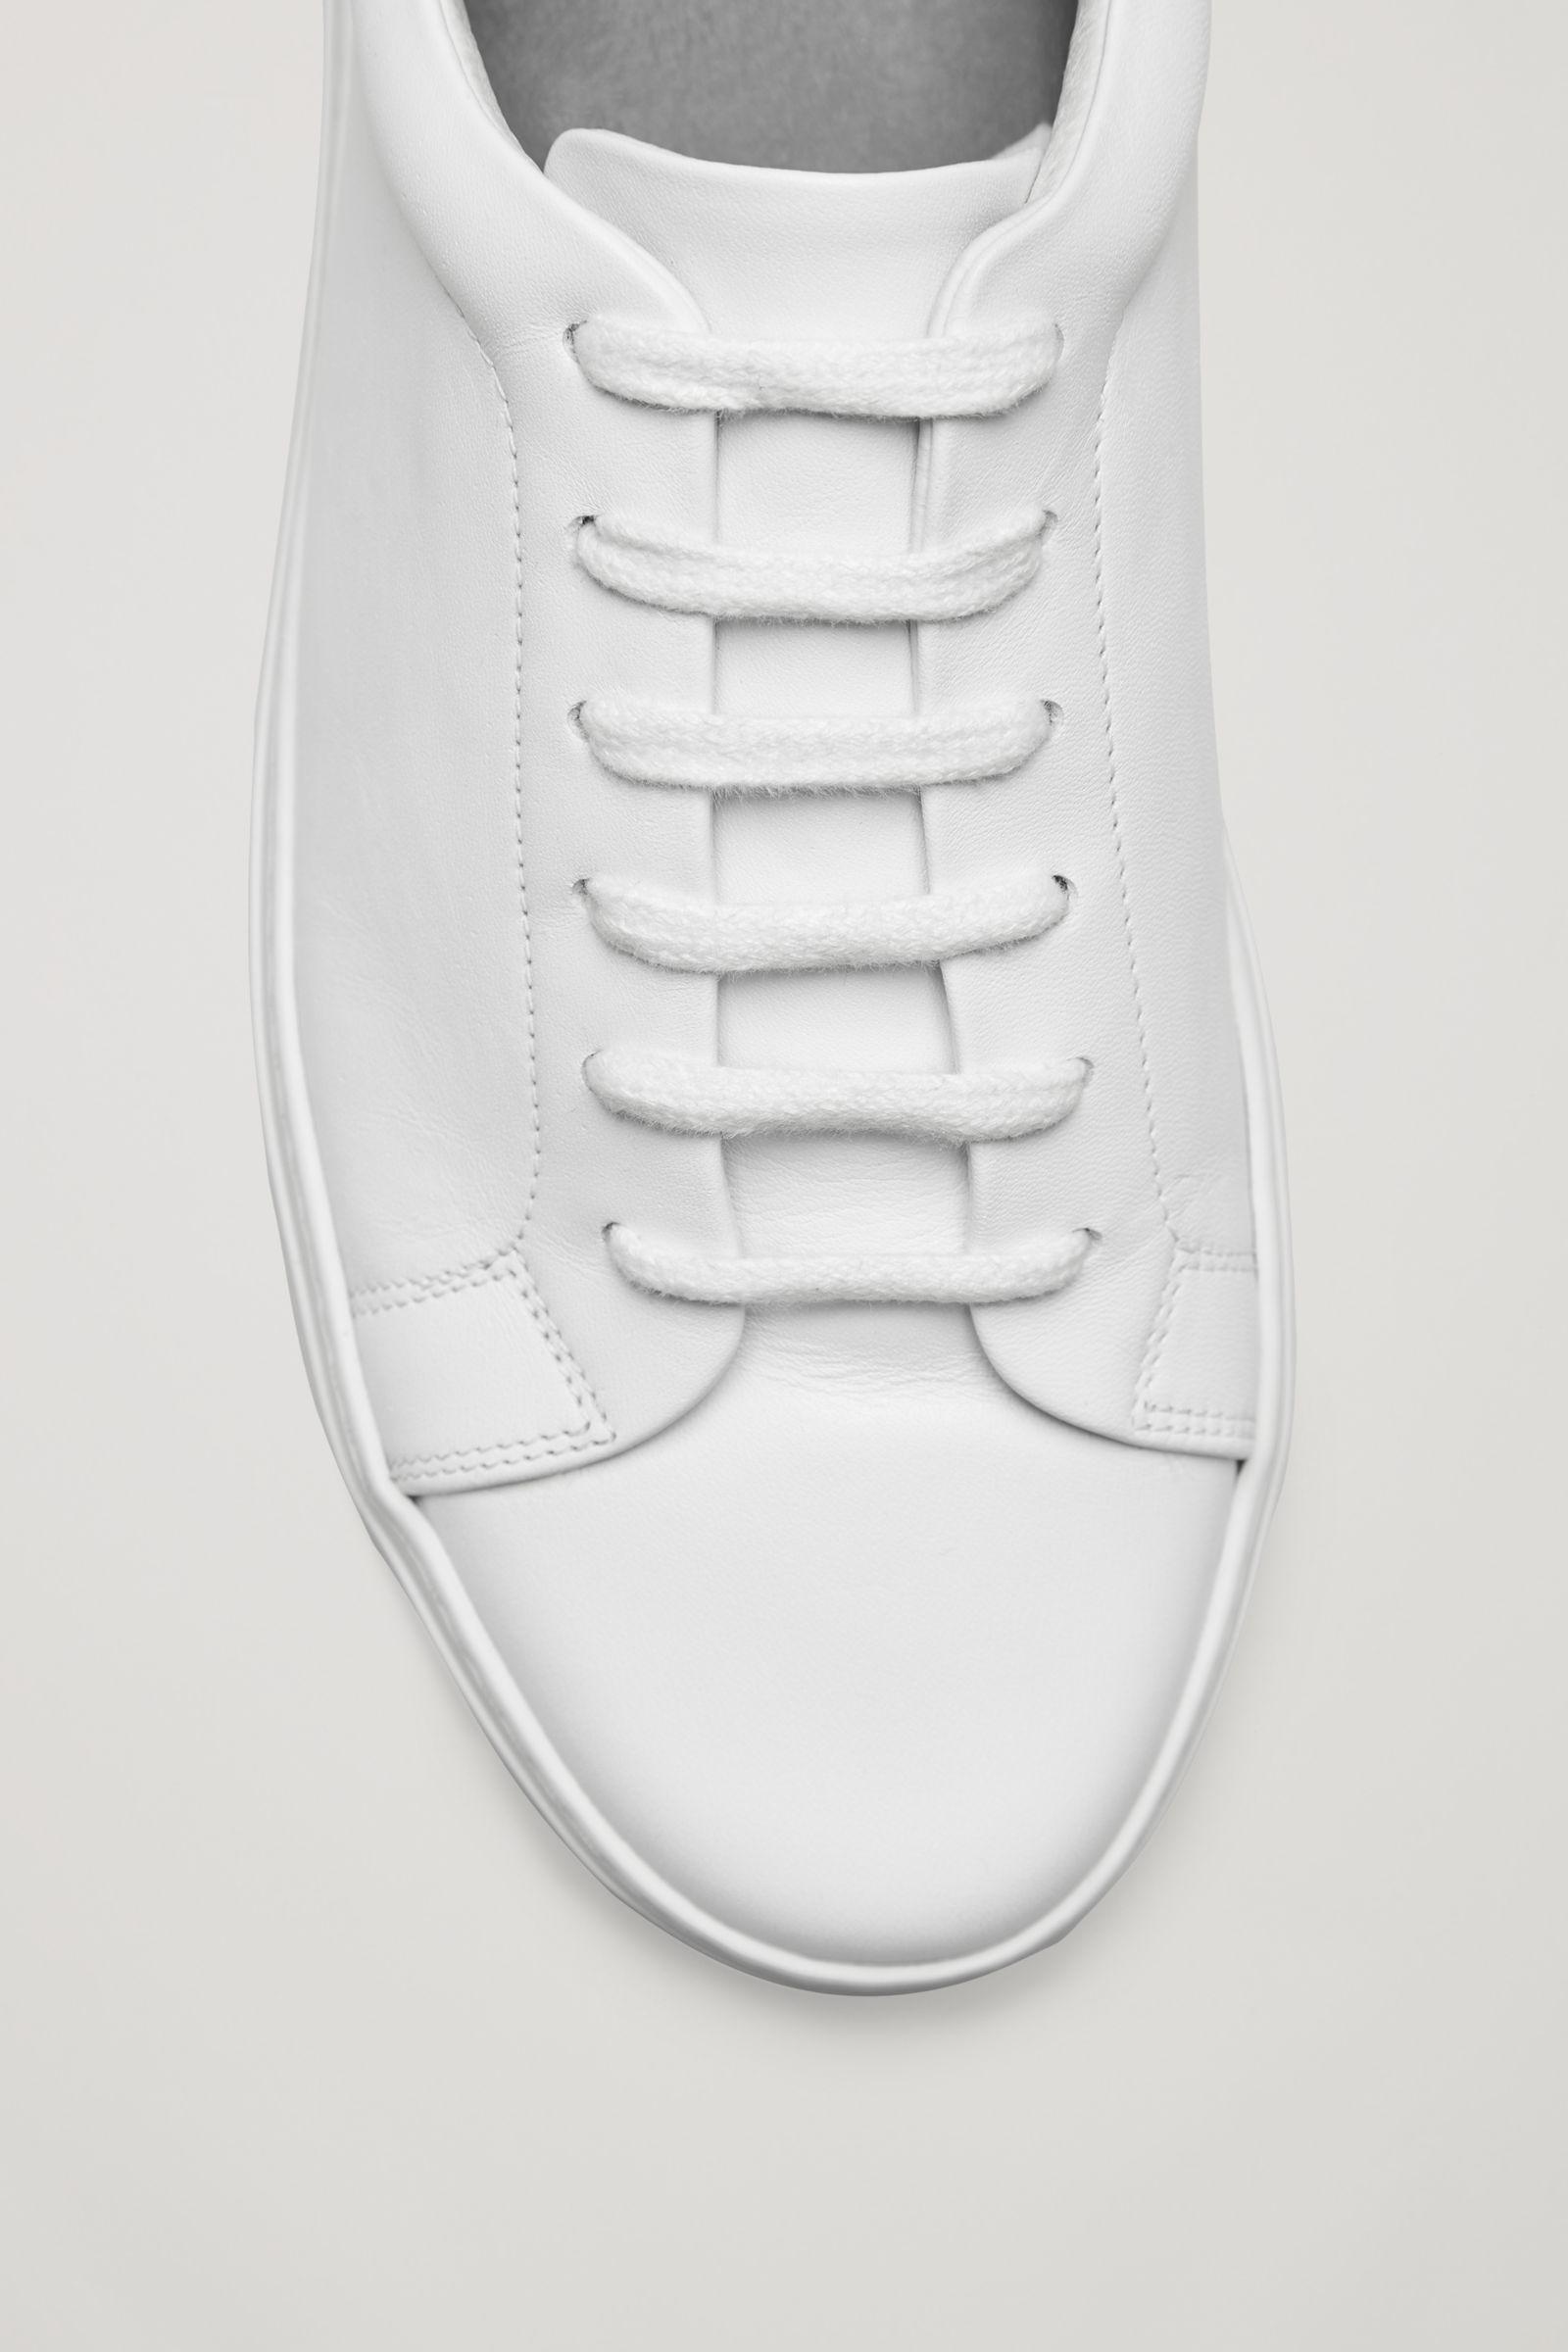 COS Lace-Up Leather Sneakers in White 